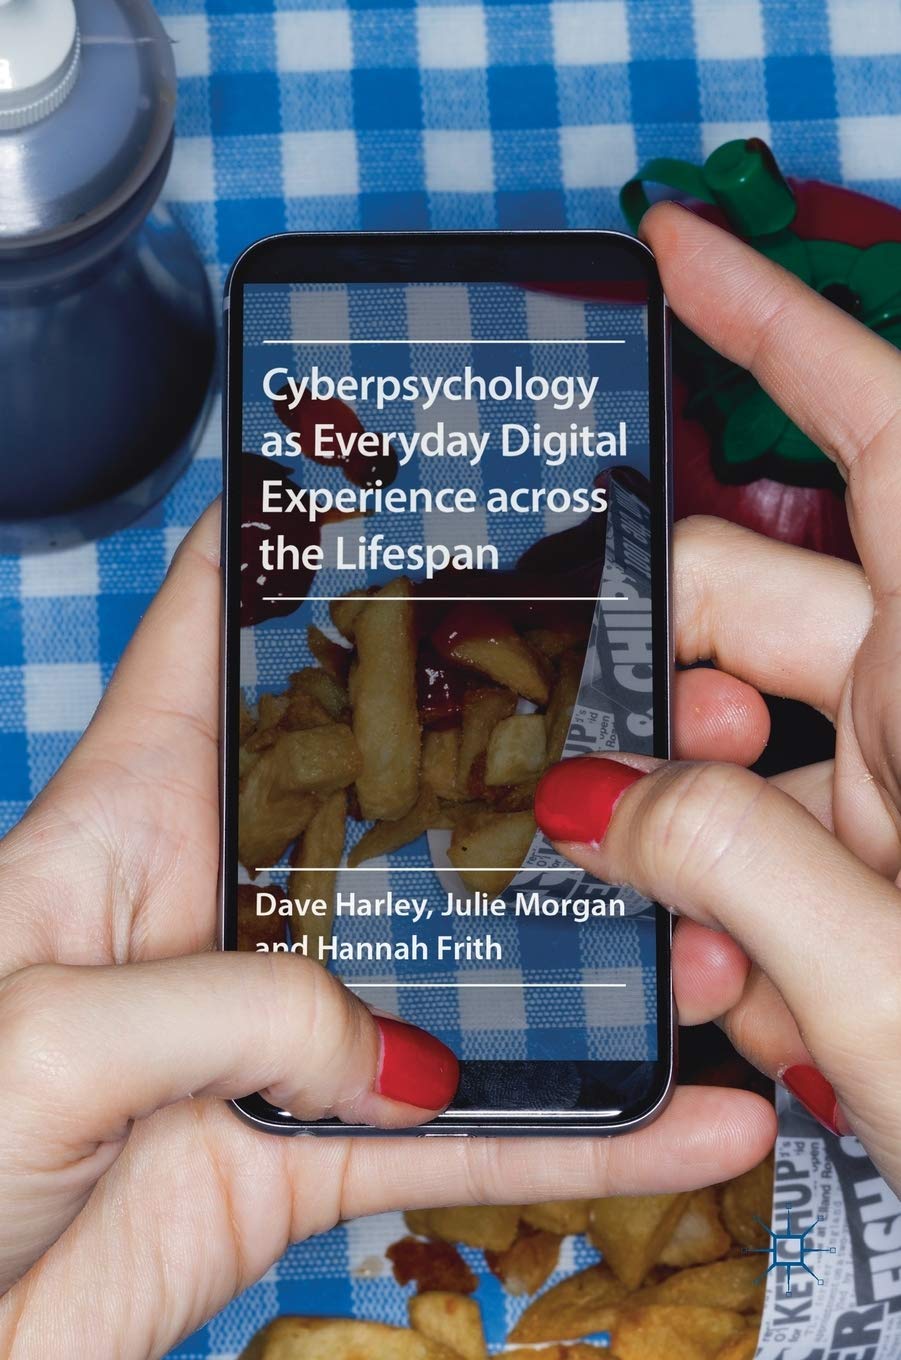 Cyberpsychology as everyday digital experience